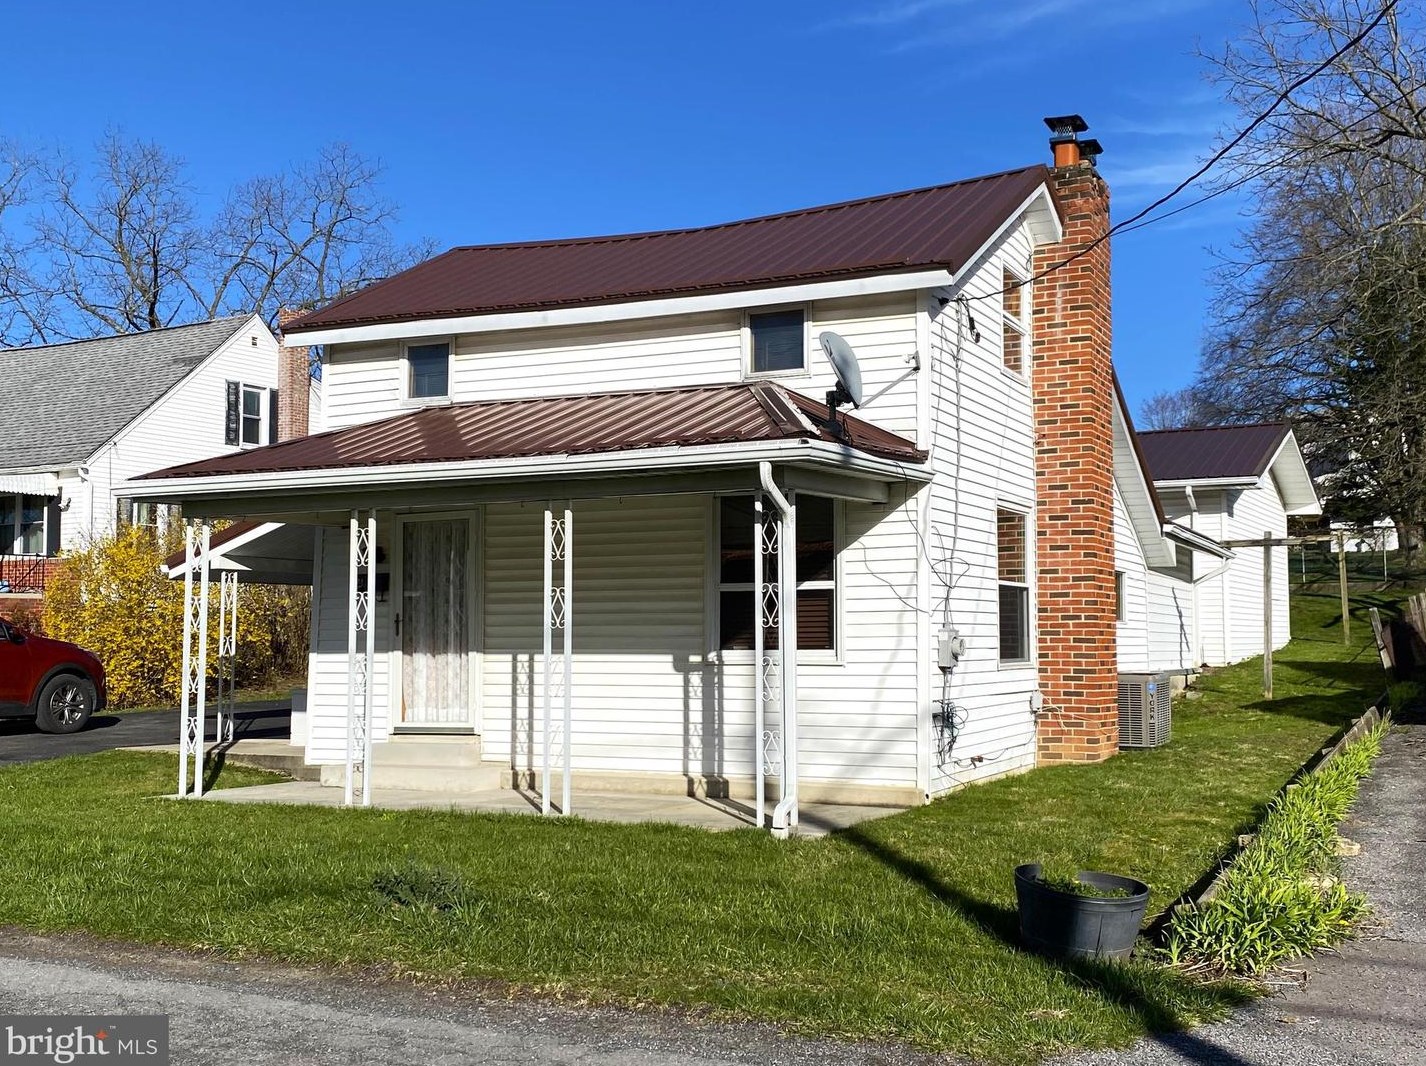 64 Armstrong St, Frostburg, MD 21532